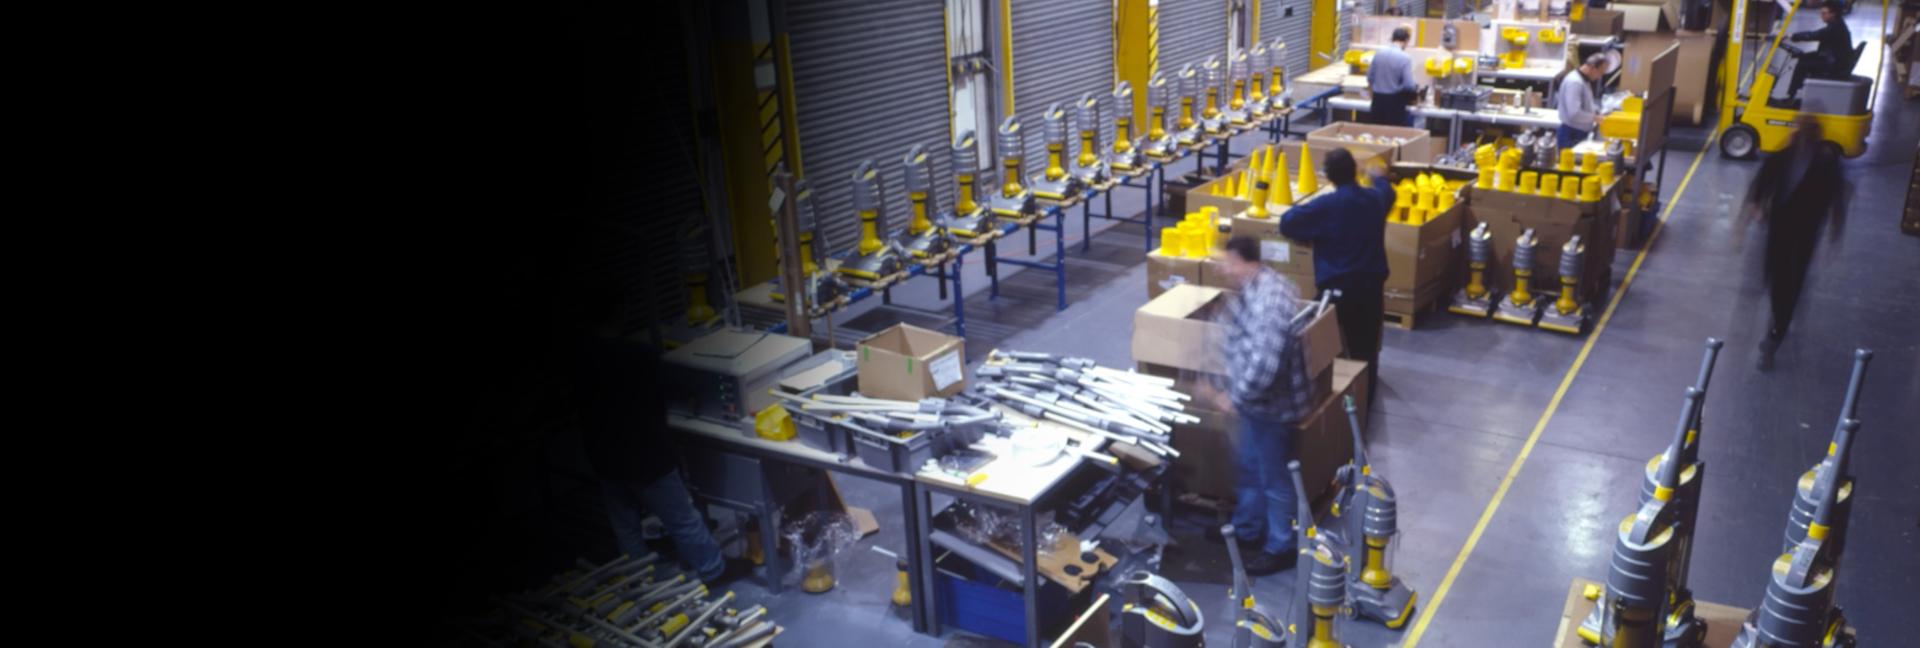 View of the DCO1 production line showing Dyson machines